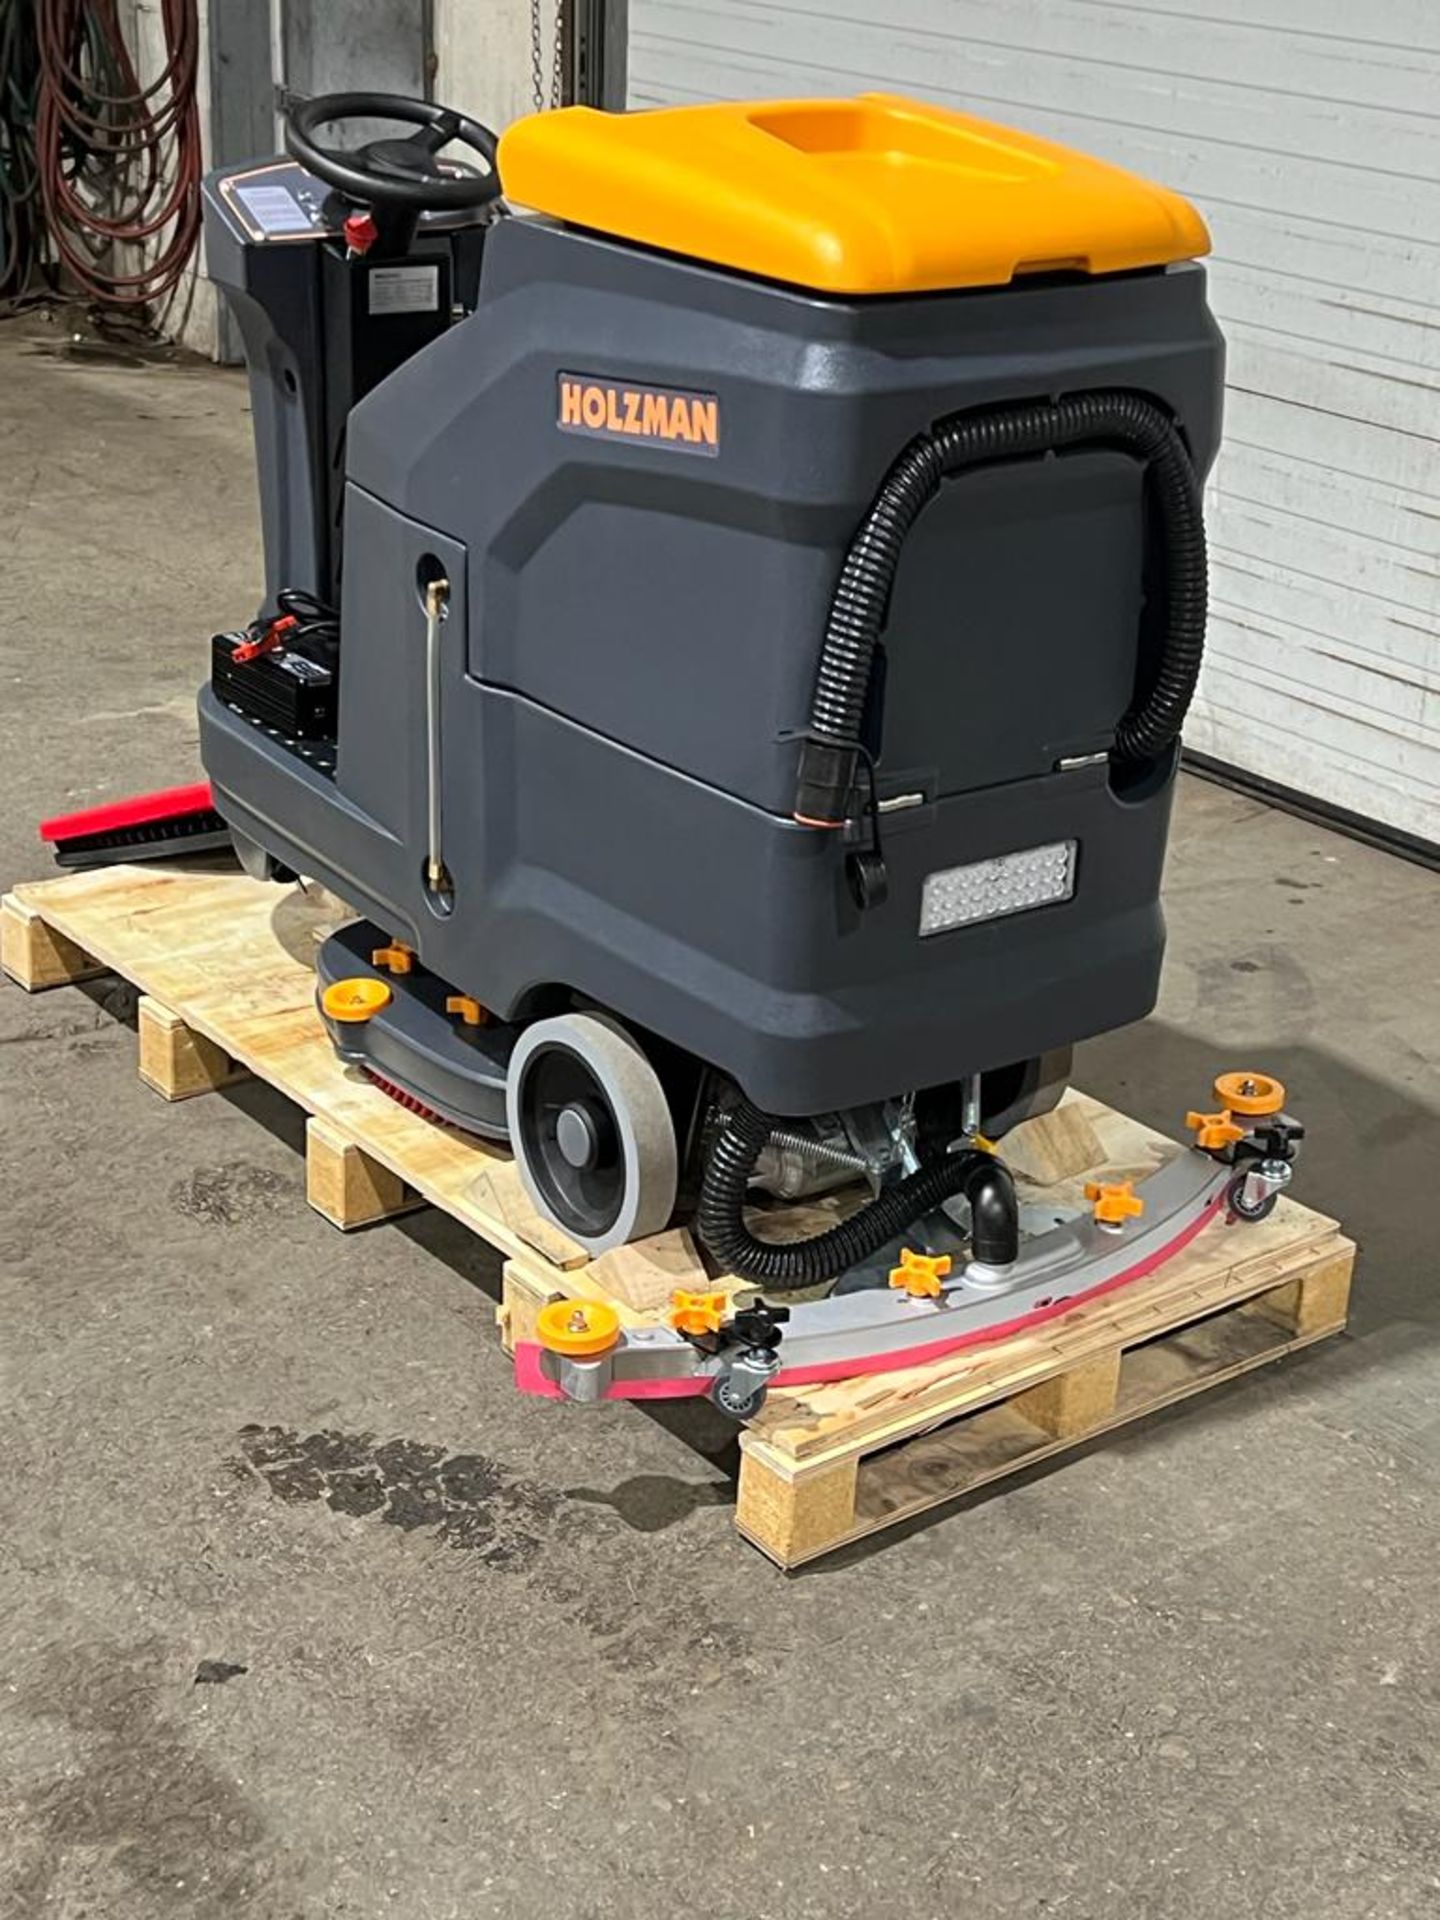 Holzman MINT RIDE ON Floor Sweeper Scrubber Unit model K70 - BRAND NEW with extra pads, digital - Image 6 of 6